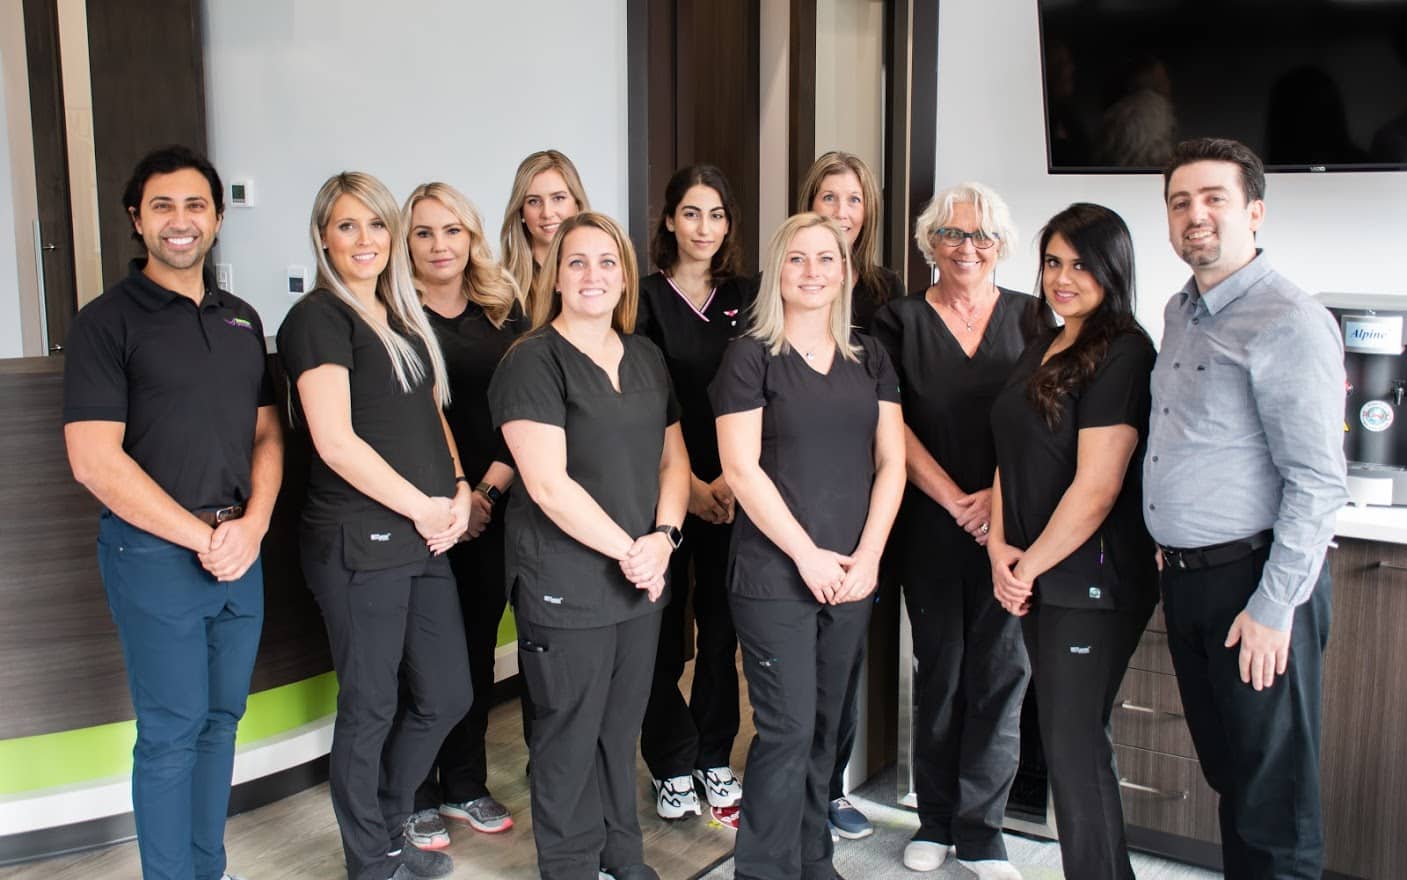 Group photo of 11 Hometown Orthodontics team members, posing together with smiles in front of a clinic backdrop.